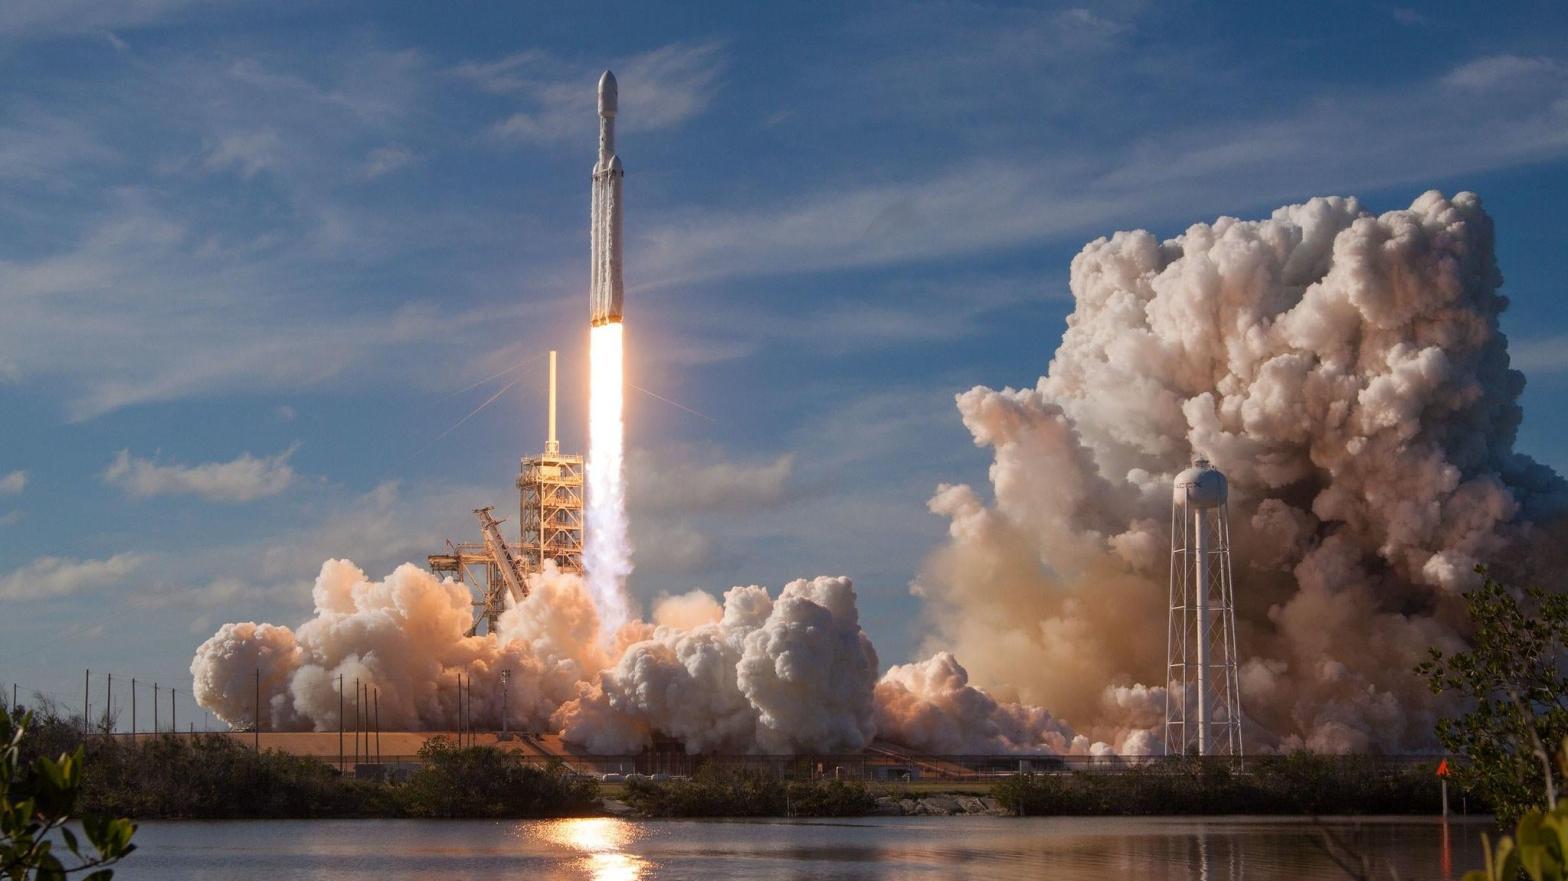 Inaugural launch of SpaceX's Falcon Heavy on February 6, 2018. (Photo: SpaceX)